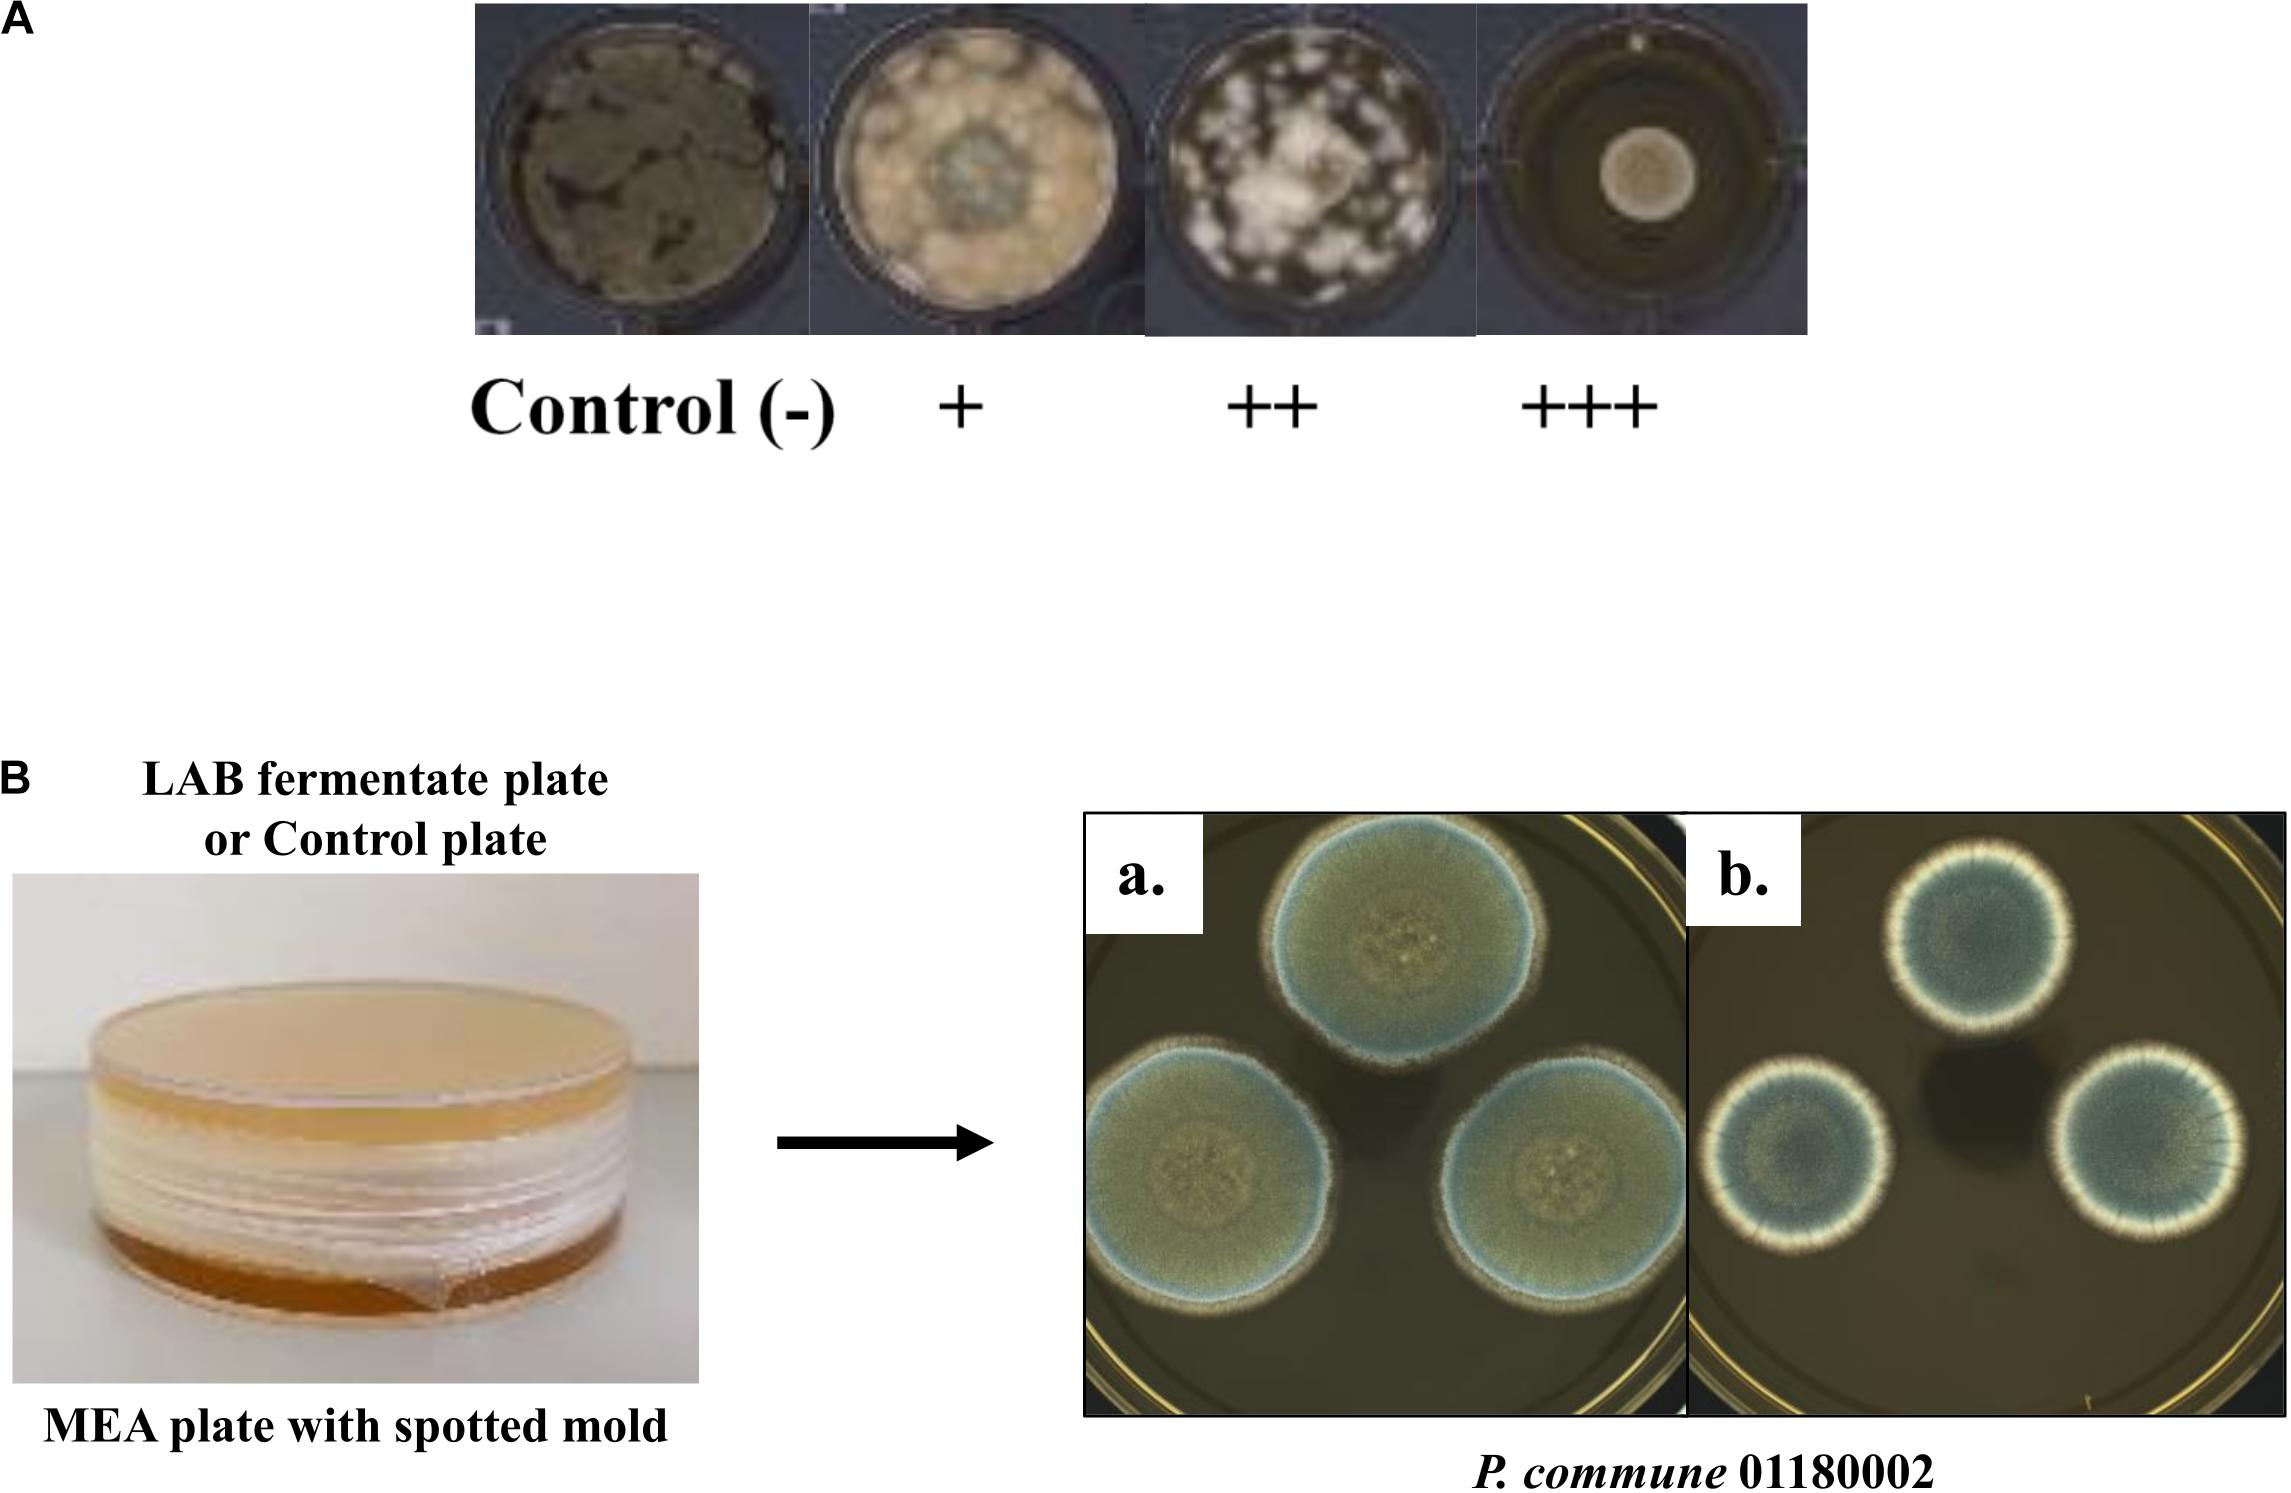 Air sampling in mycology. Detect mold contamination with DIY agar test